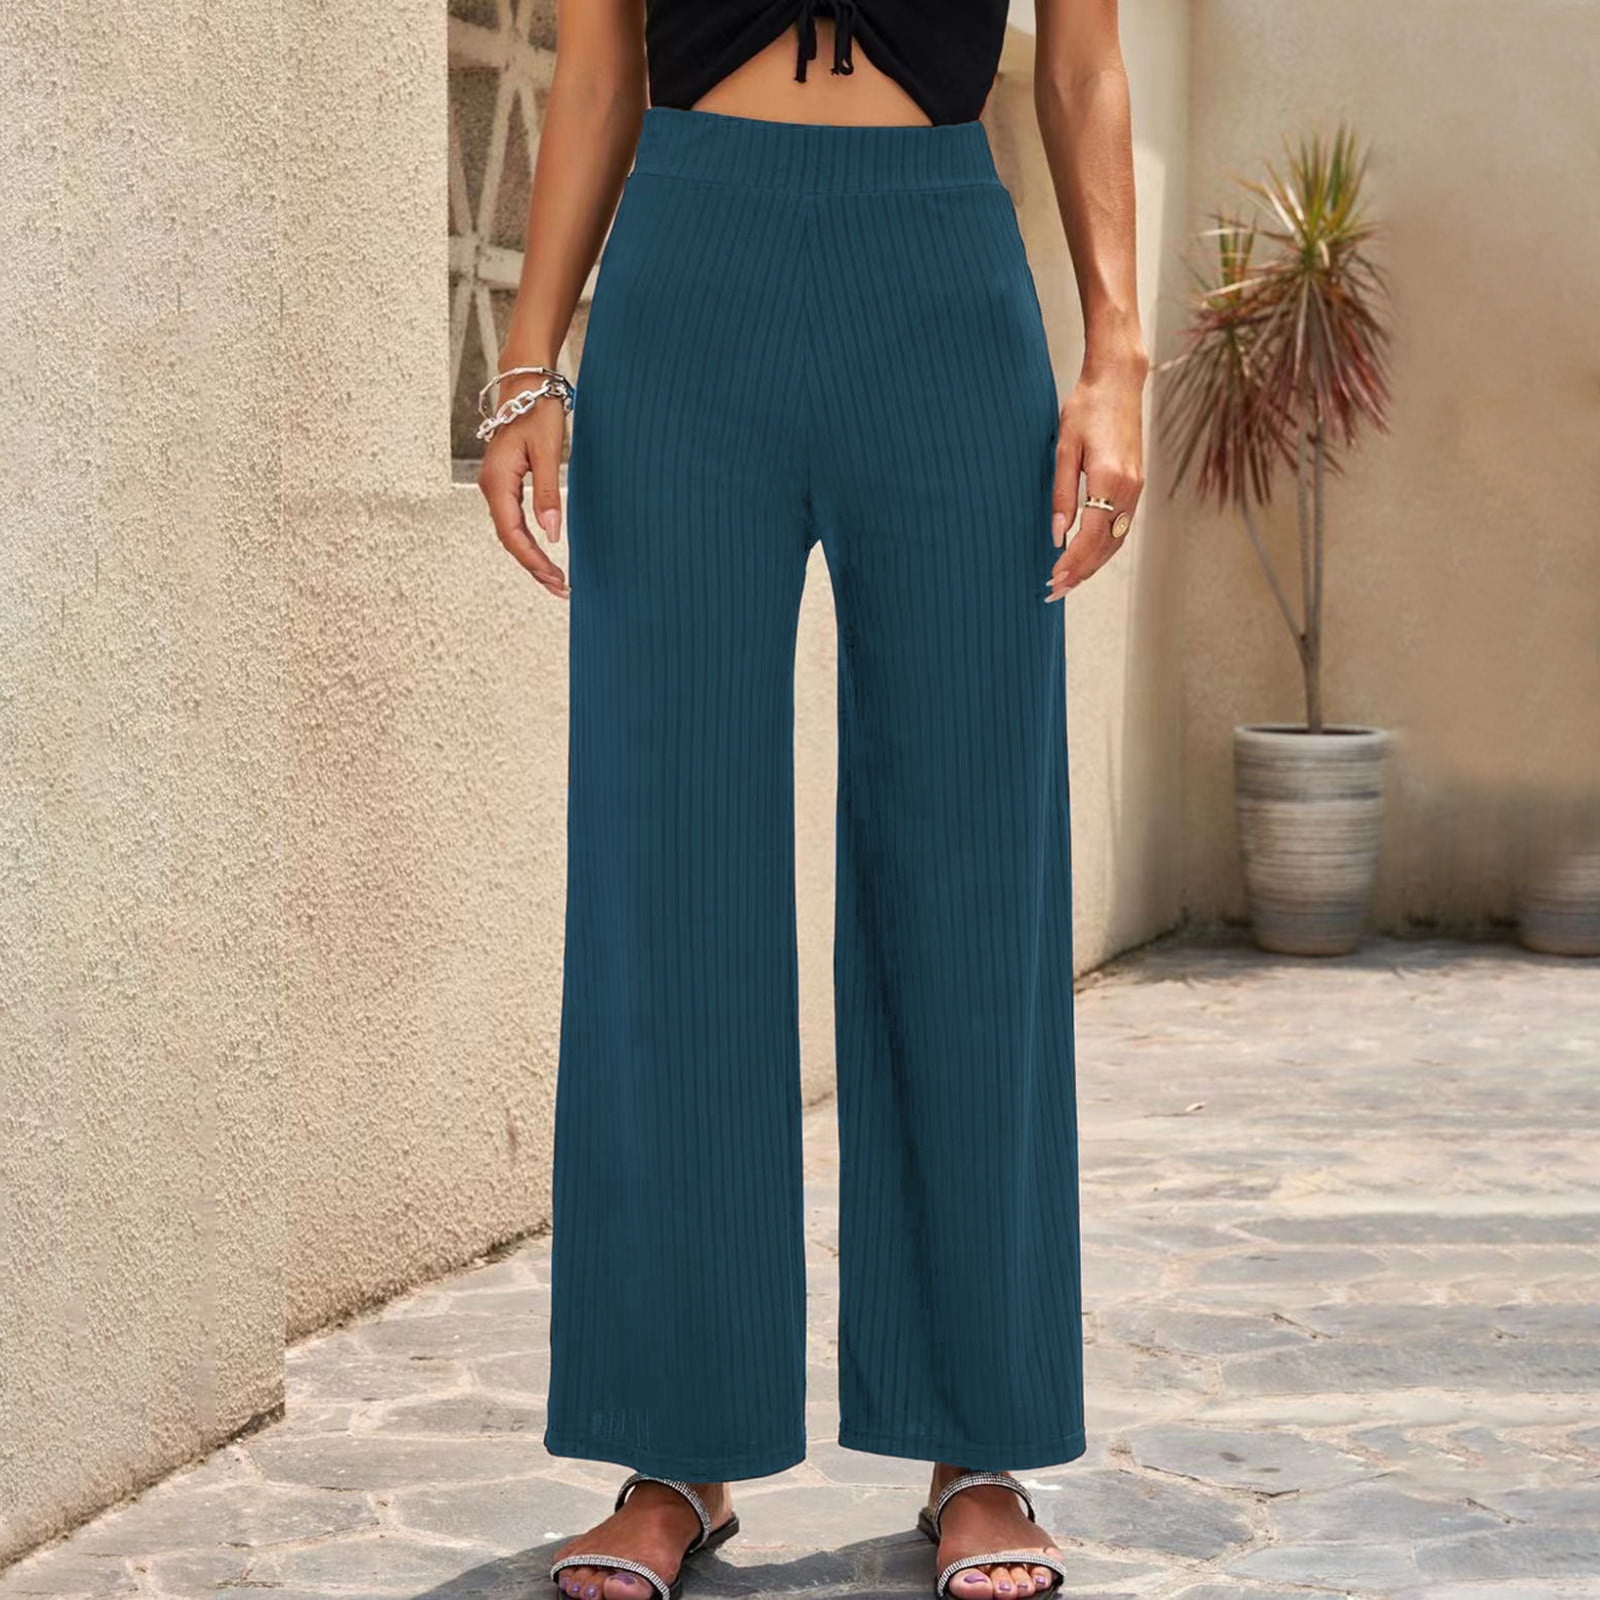 Amazon.com: Womens Linen High Waisted Pants Summer Button Trim Wide Leg  Pants Loose Casual Palazzo Pants Trousers with Pockets Linen Beach Pants  Women Yoga Pants White Linen Pants Women Wide Leg Pants :